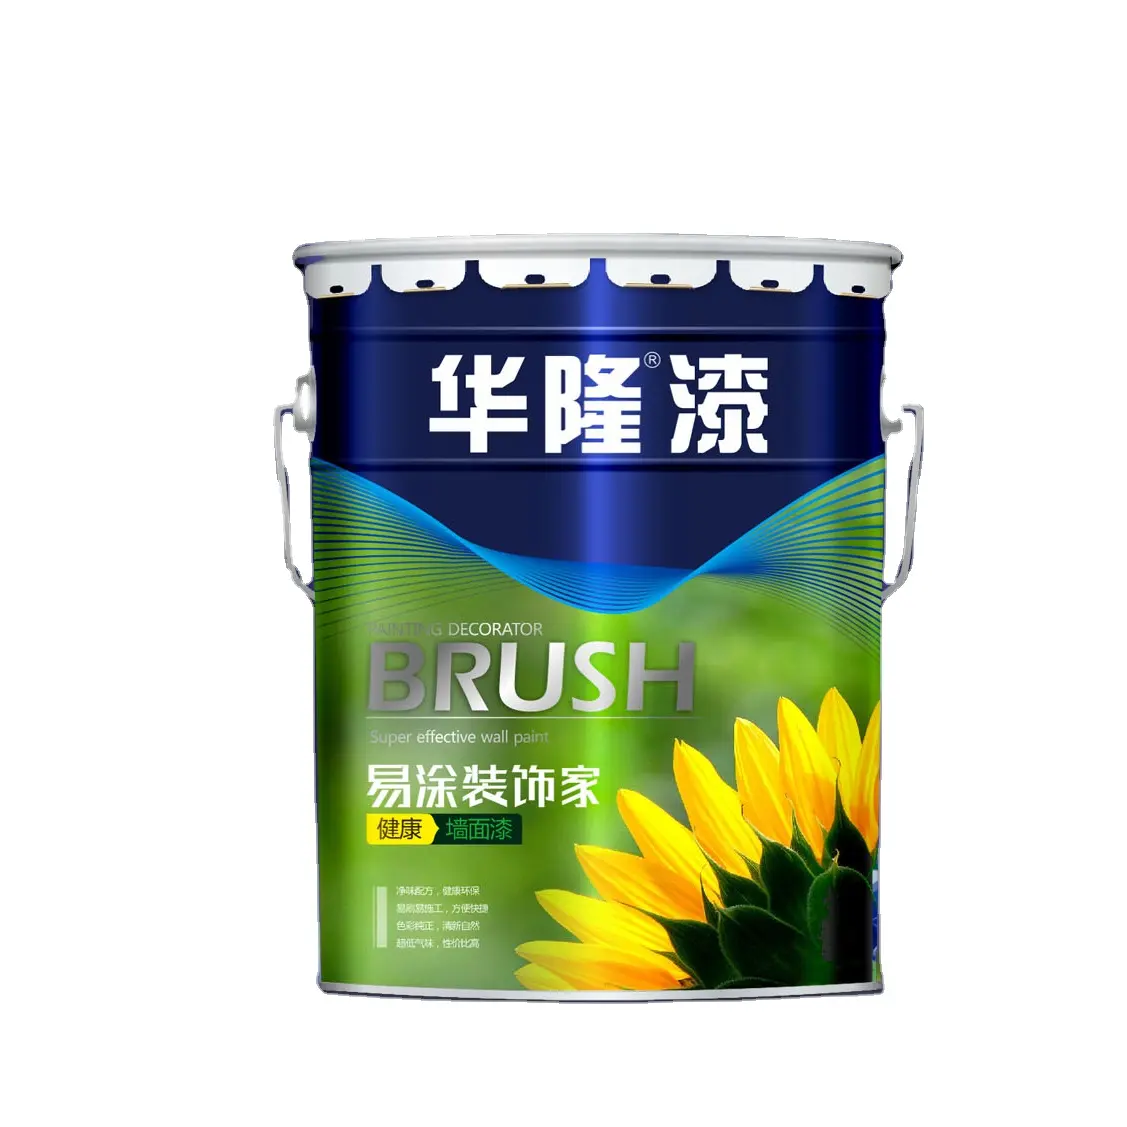 Efficiently Remove Mites Purify Air Children Green Interior Ceiling Wall Paint Emulsion Additive Free for Children Bedroom